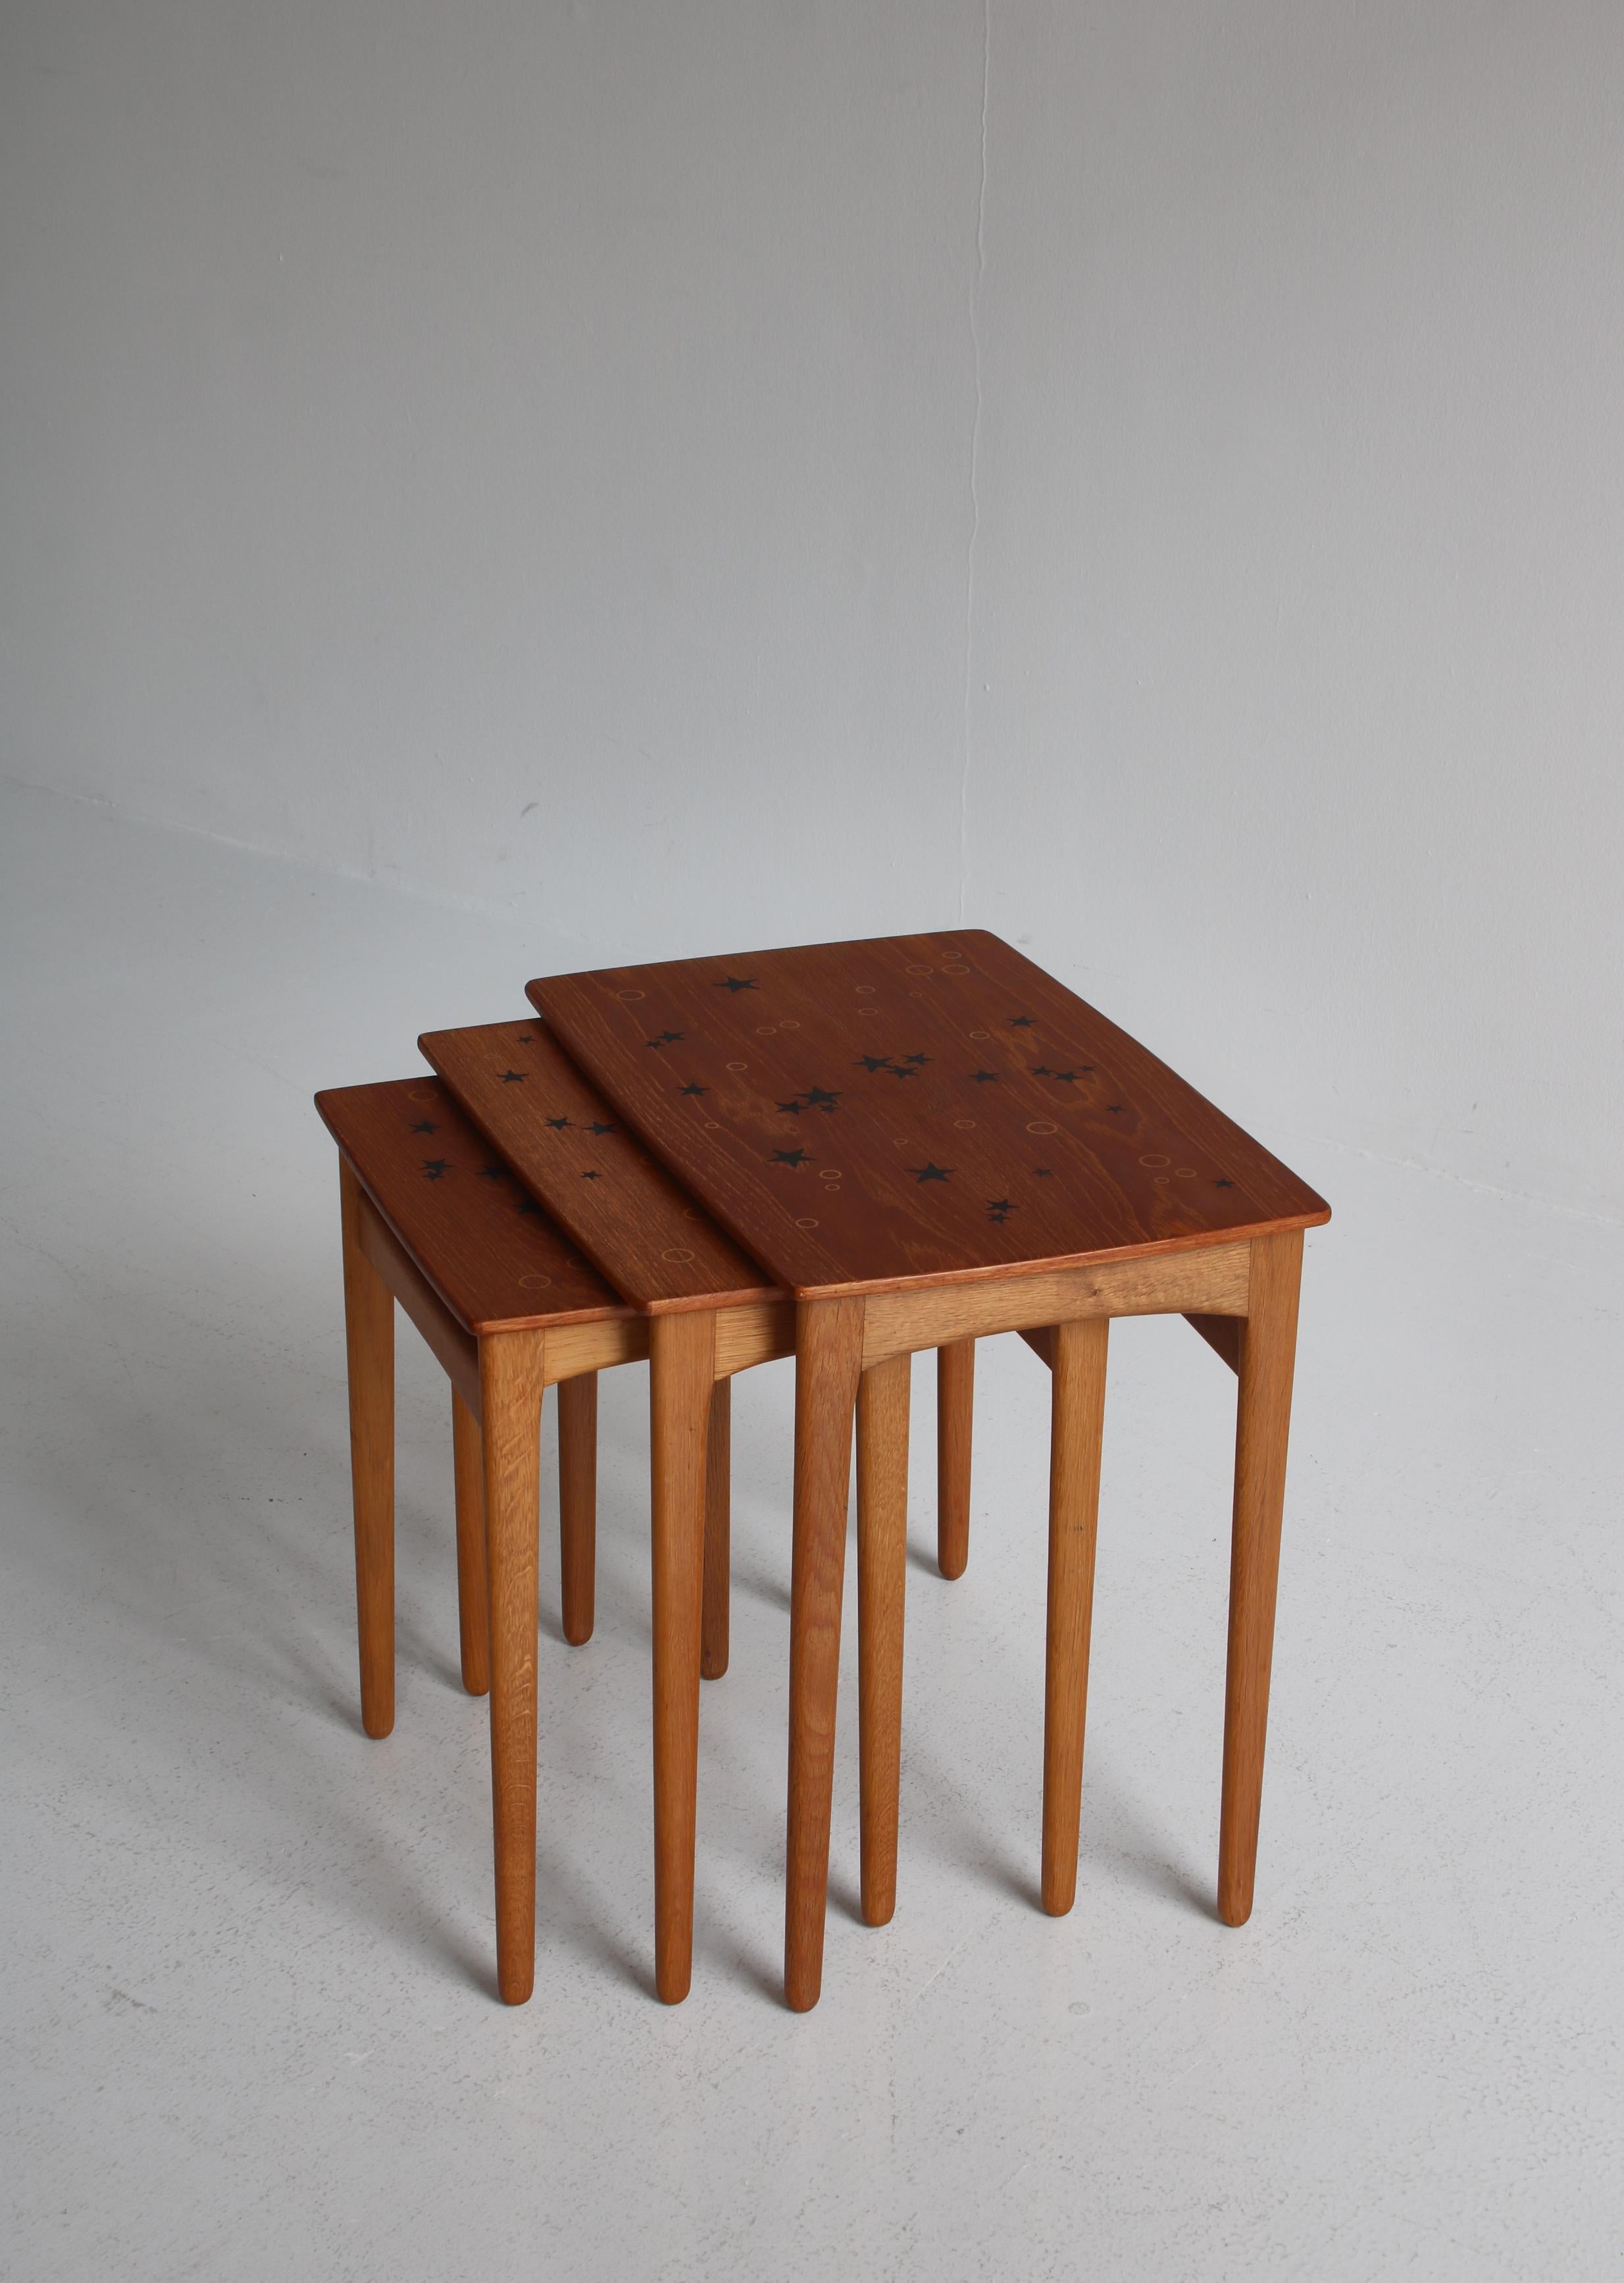 Mid-20th Century Nesting Tables in Teak and oak by Svend Aage Madsen, Denmark, 1950s For Sale